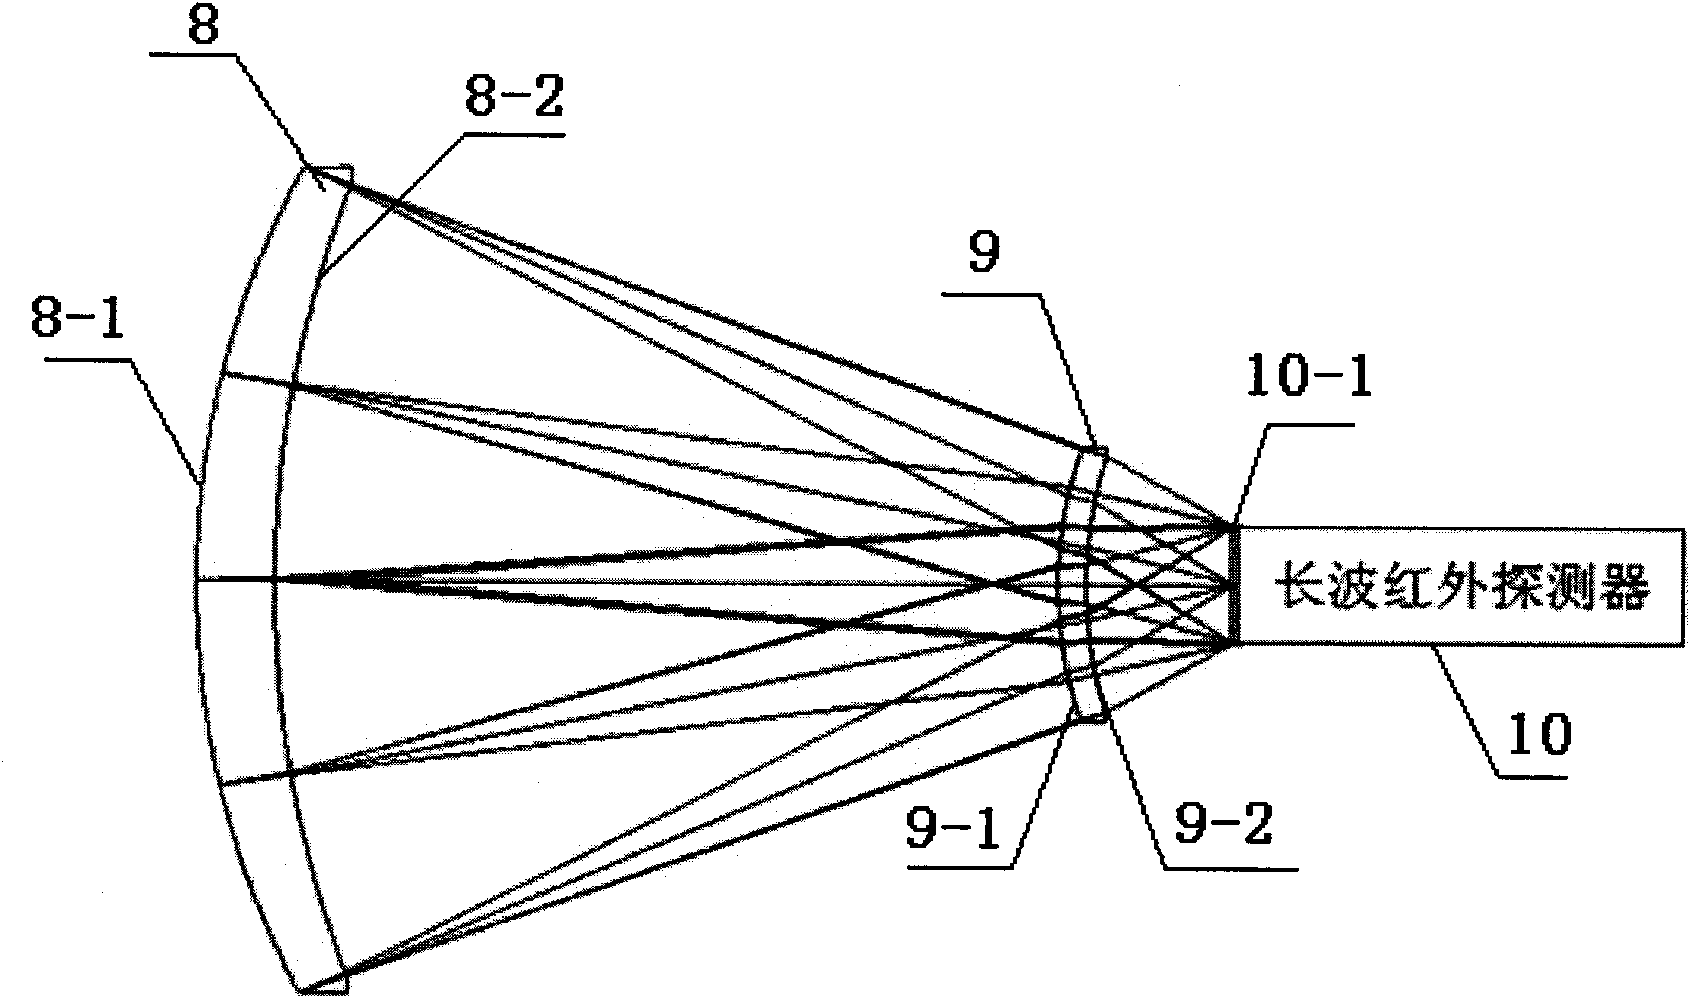 Optical system of multispectral area array CCD (Charge Coupled Device) imager